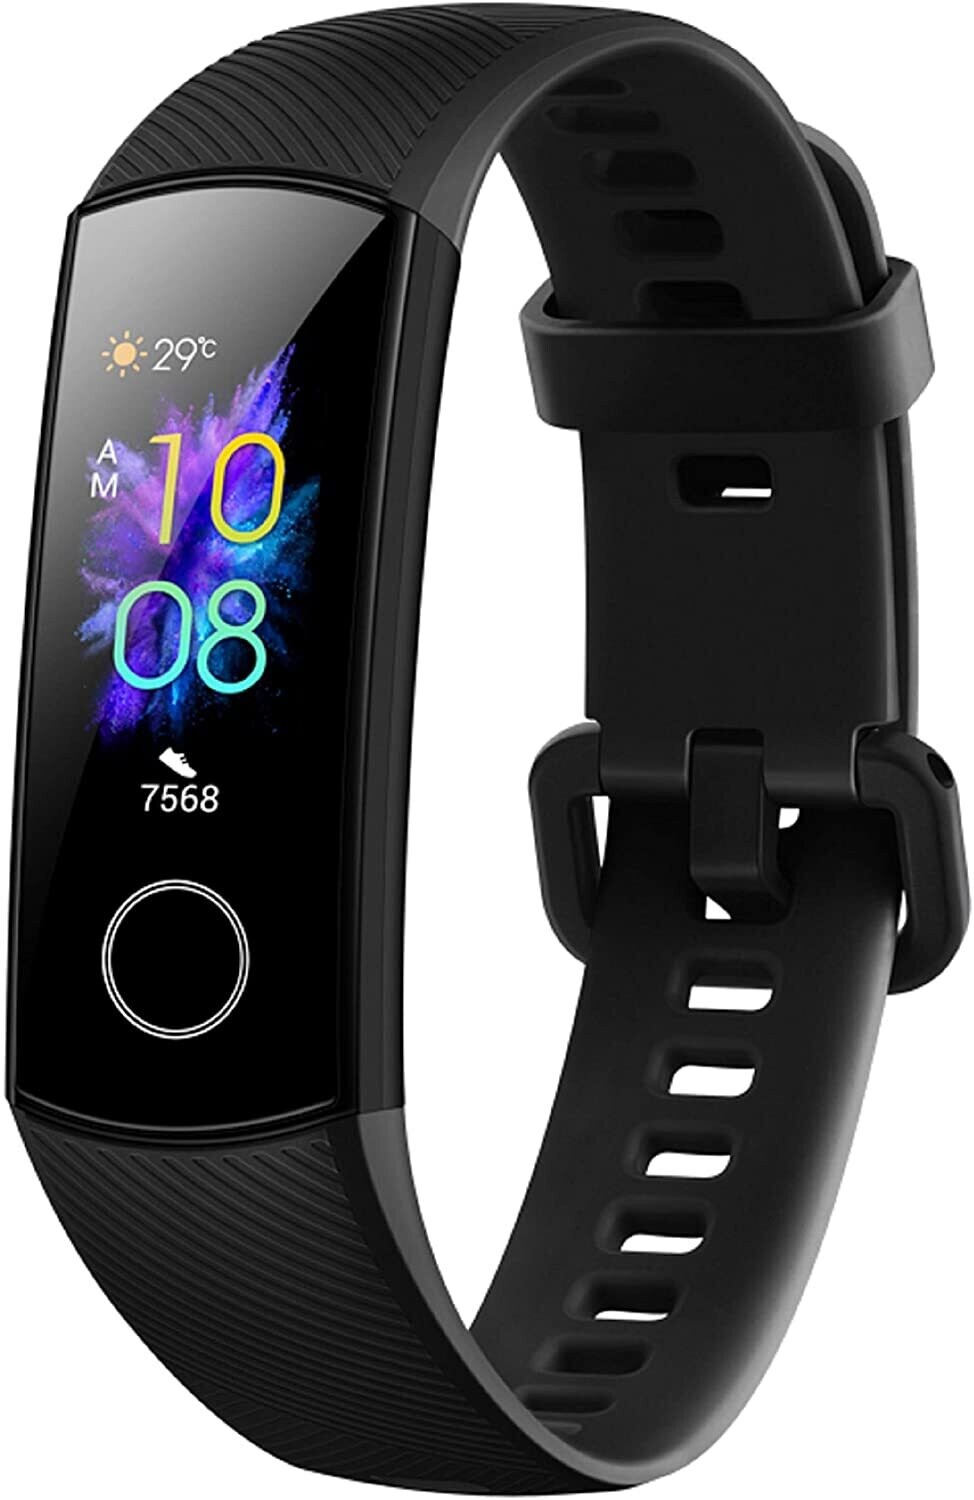 Honor Band 5 Smart Watch, Smart Watch with SpO2 Monitor Heart Rate and Sleep Monitor Calorie Counter International Version